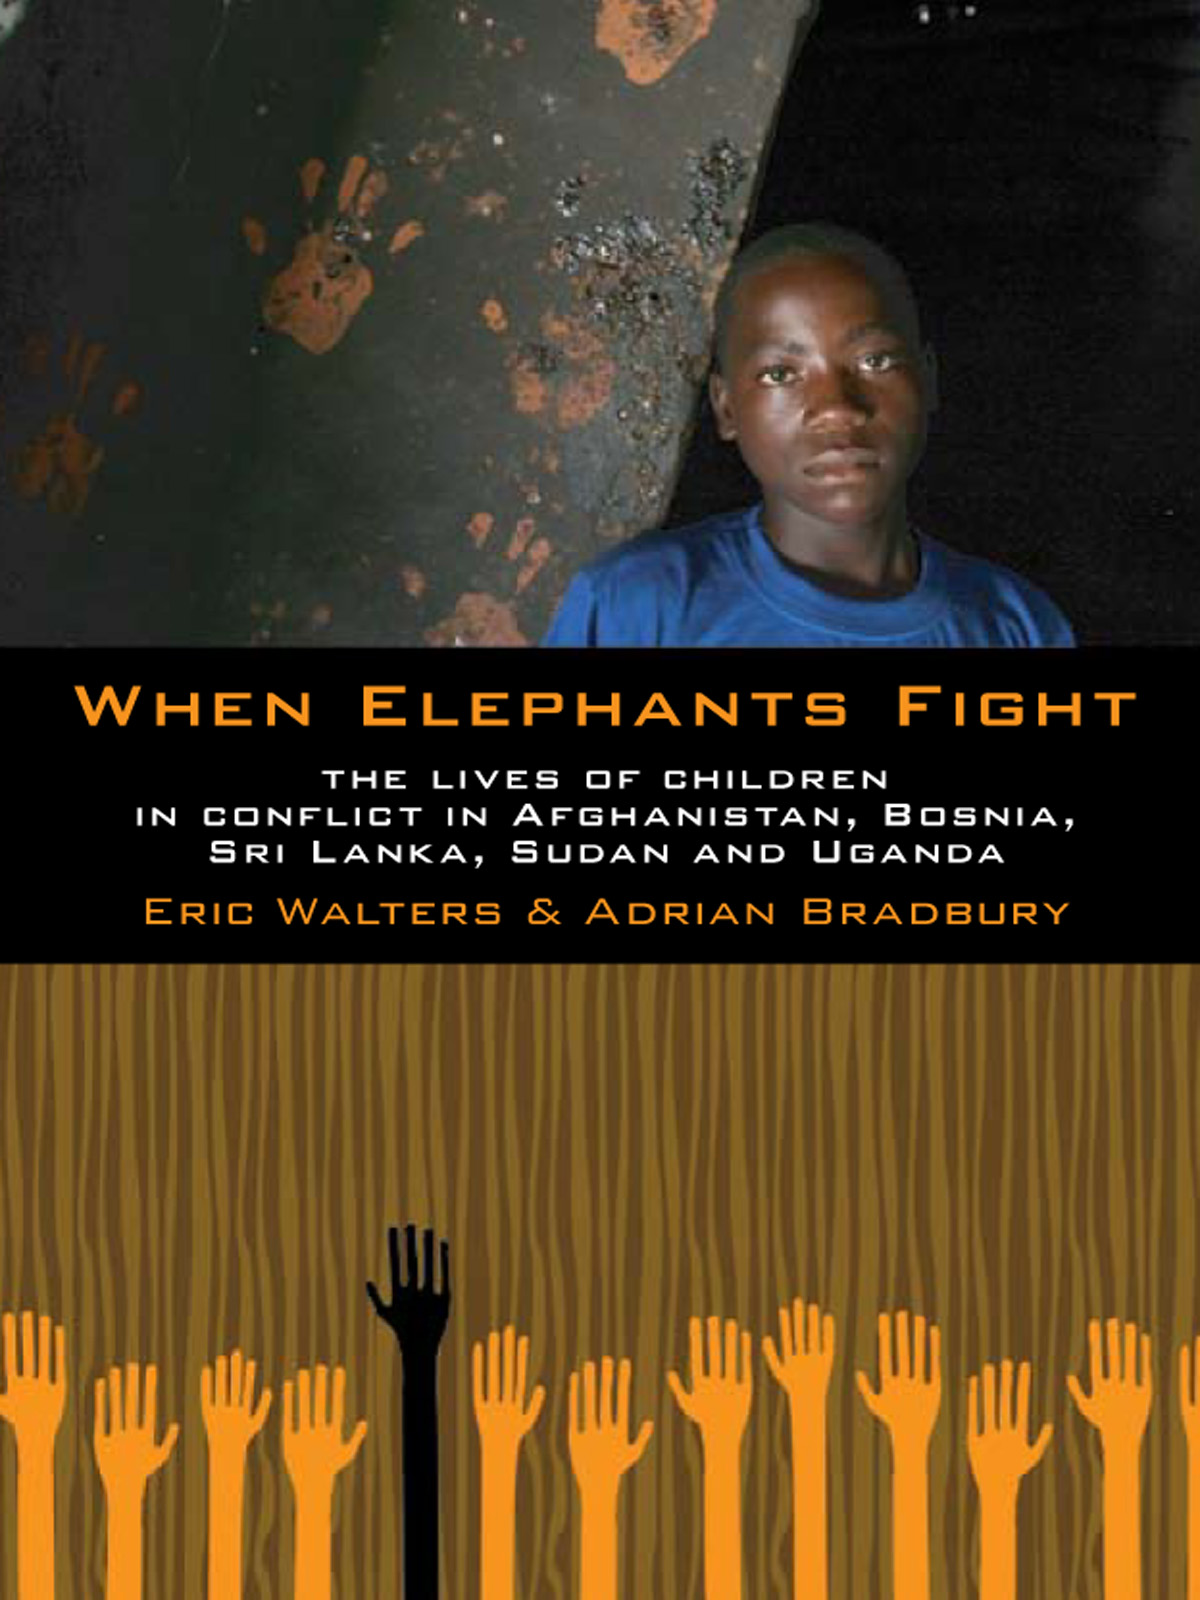 When Elephants Fight (2008) by Eric Walters